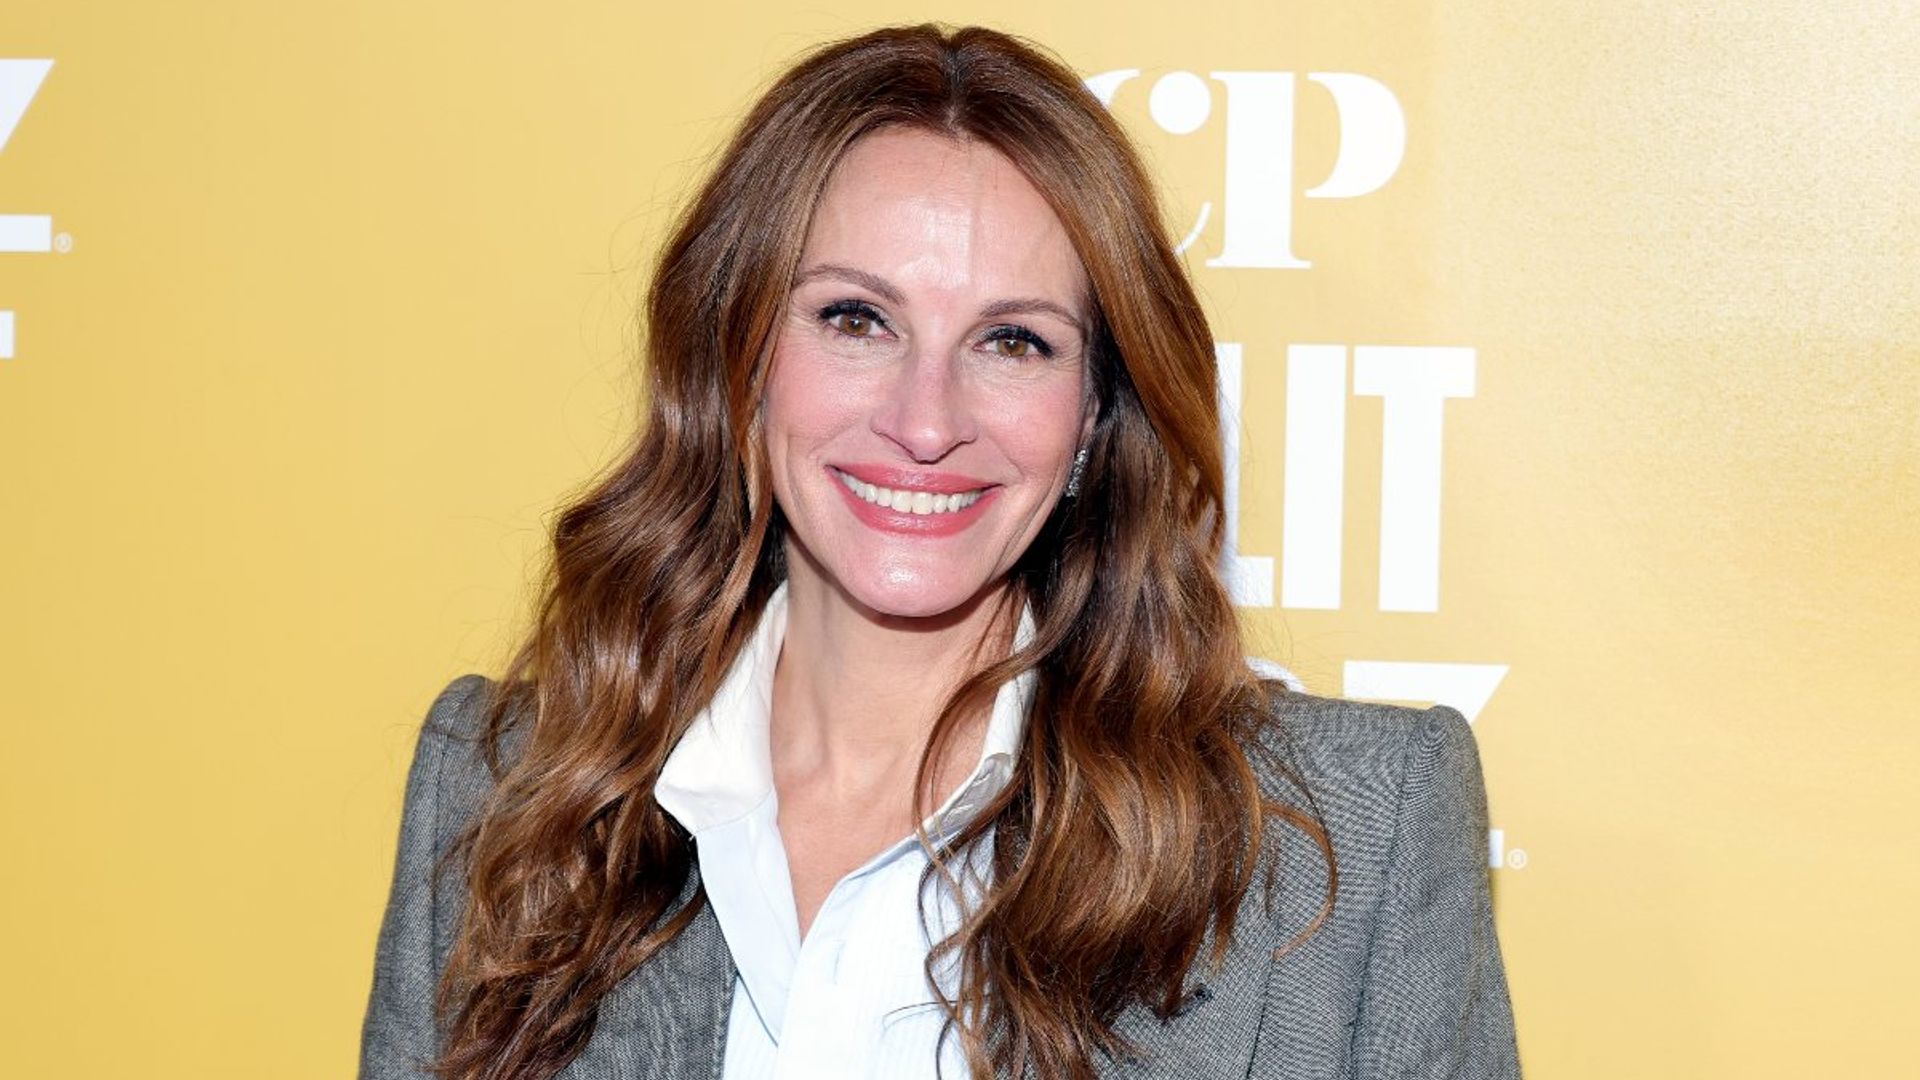 The Rookie: Feds: Julia Roberts very famous brother stars in new show - did you spot him?